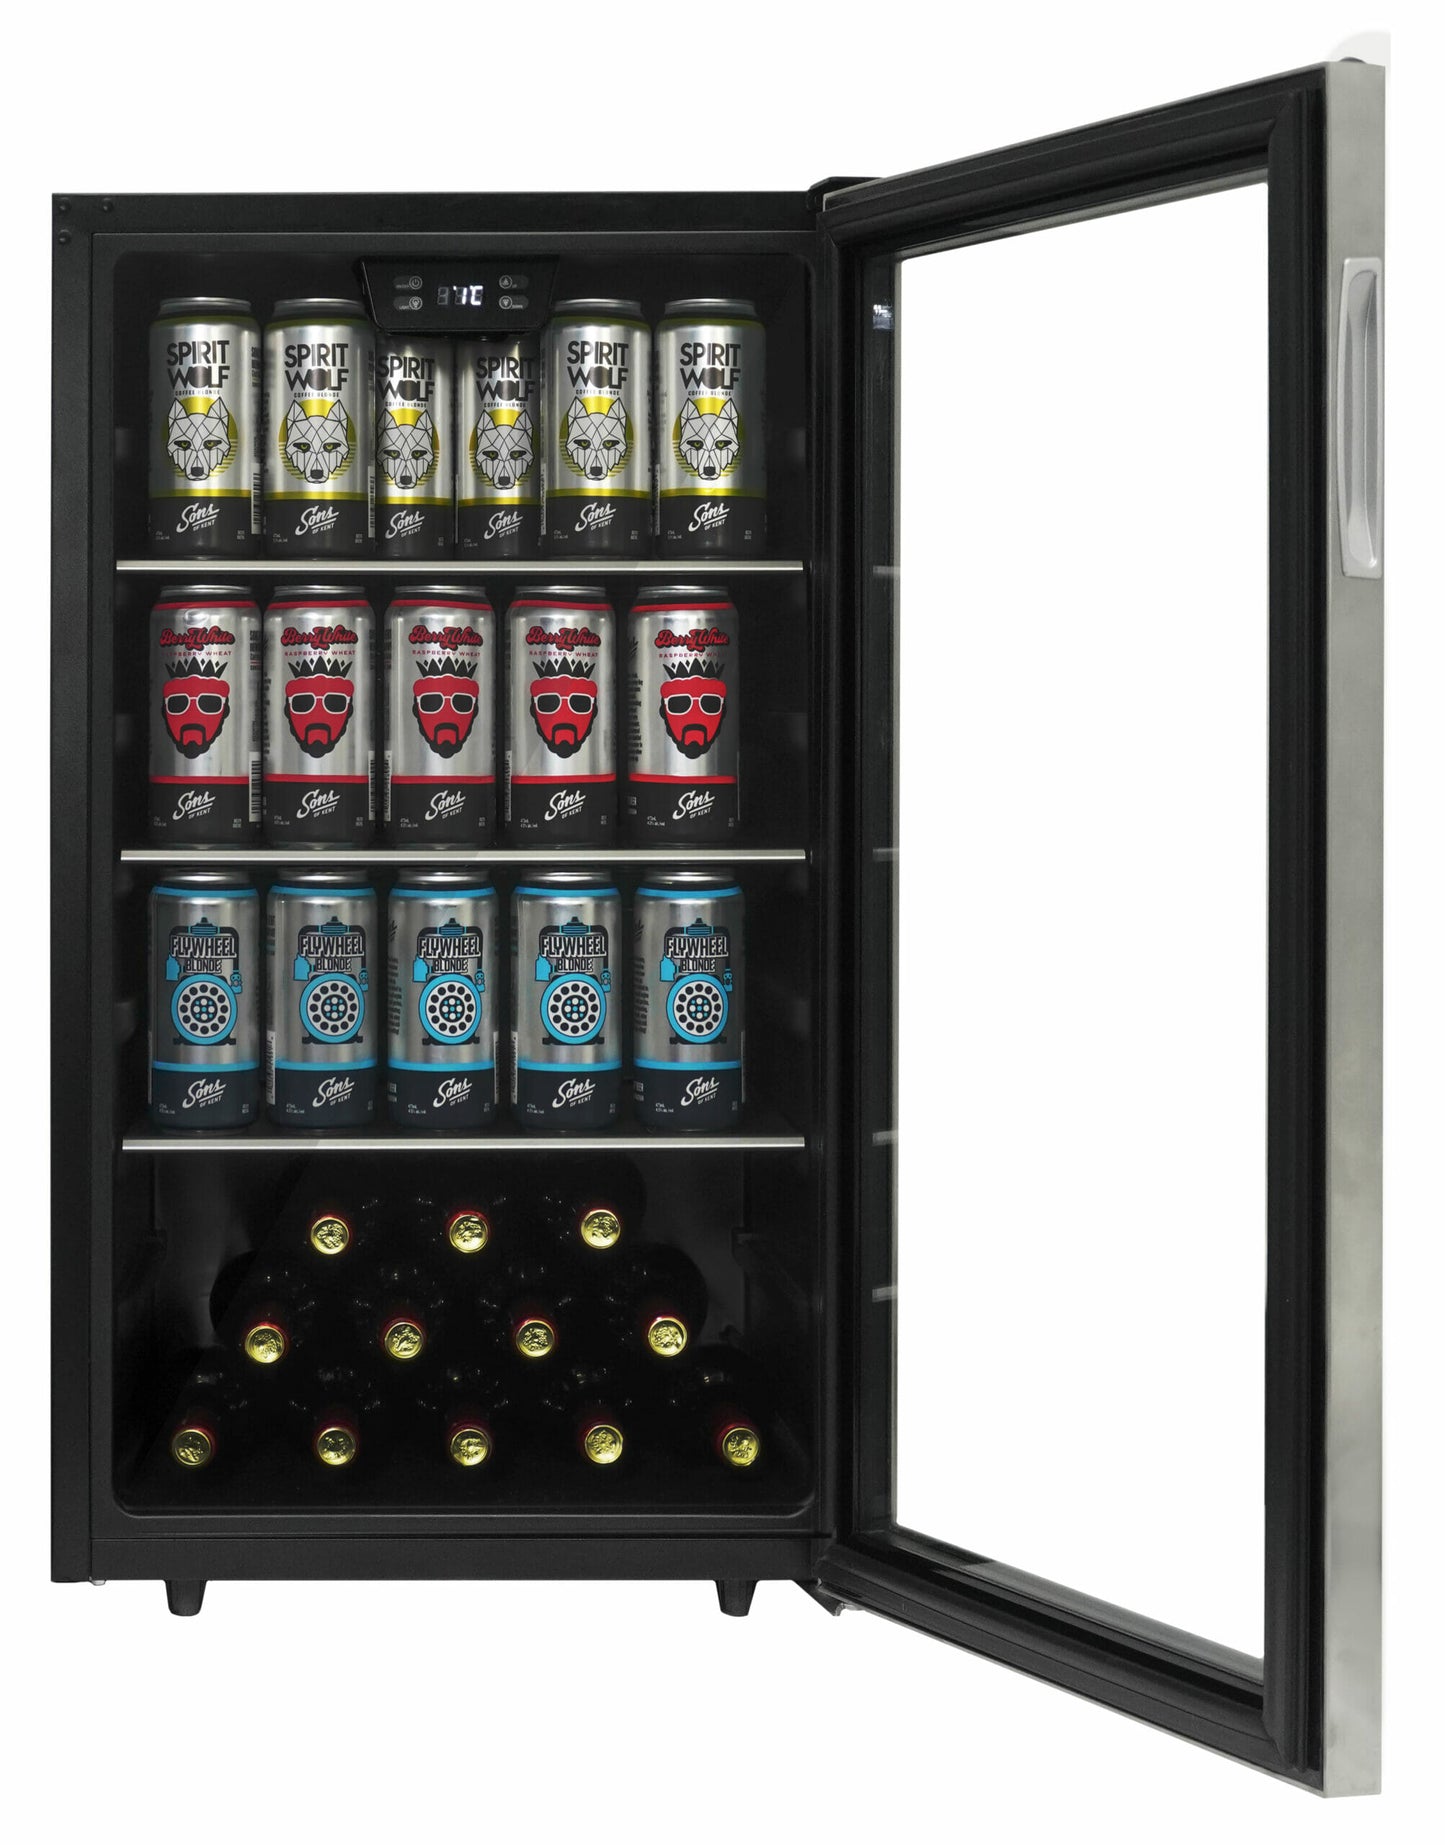 Danby 4.5 cu. ft. Free-Standing Beverage Center in Stainless Steel - DBC045L1SS